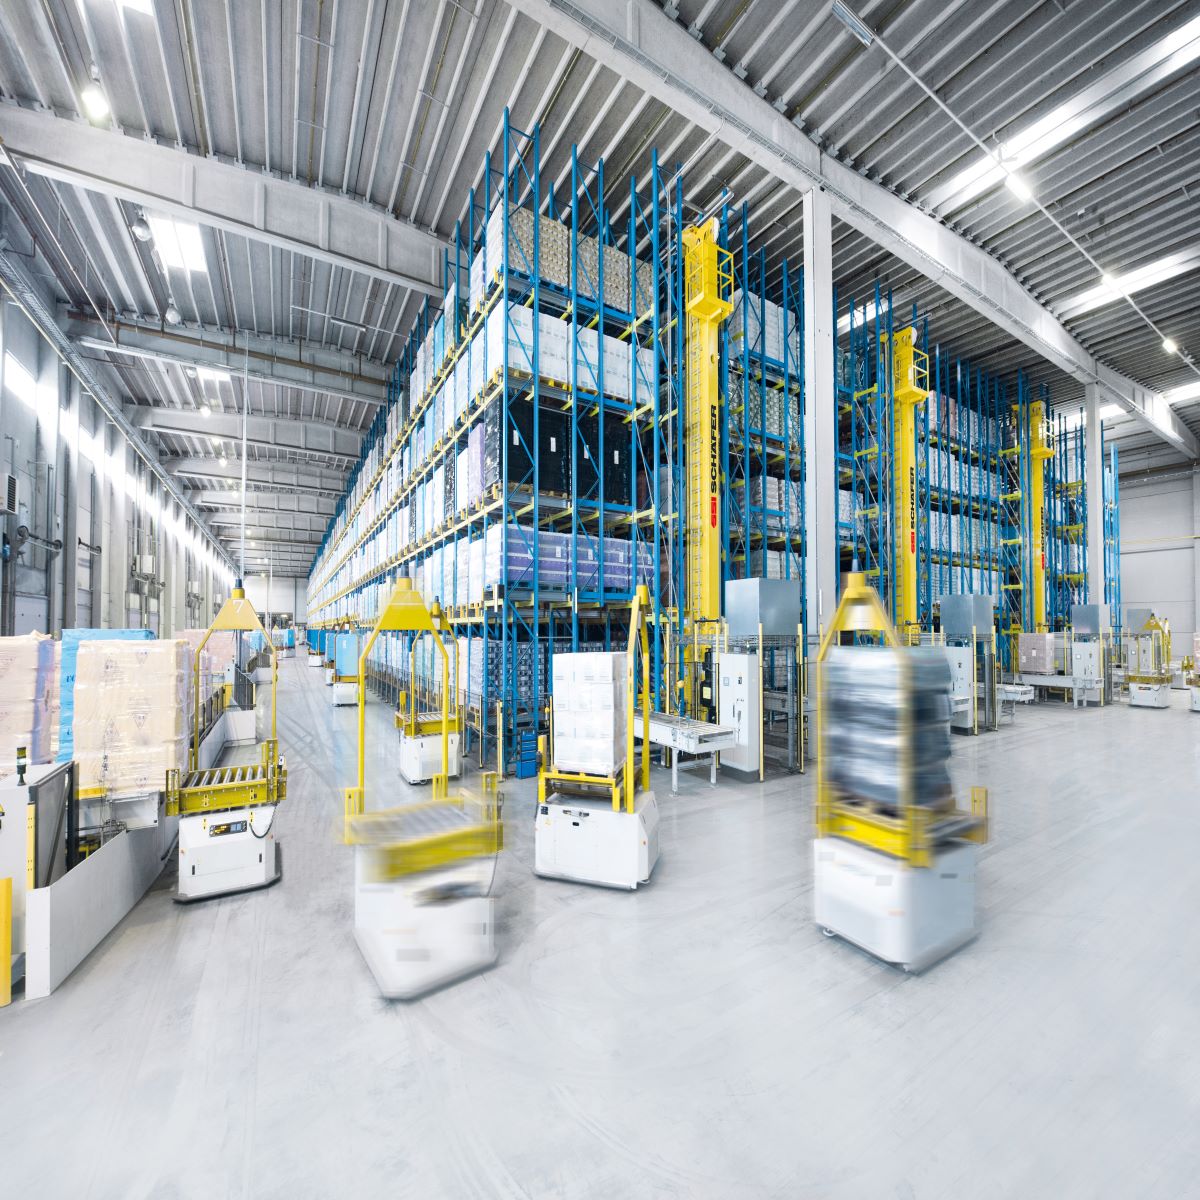 AGV automated guided vehicles